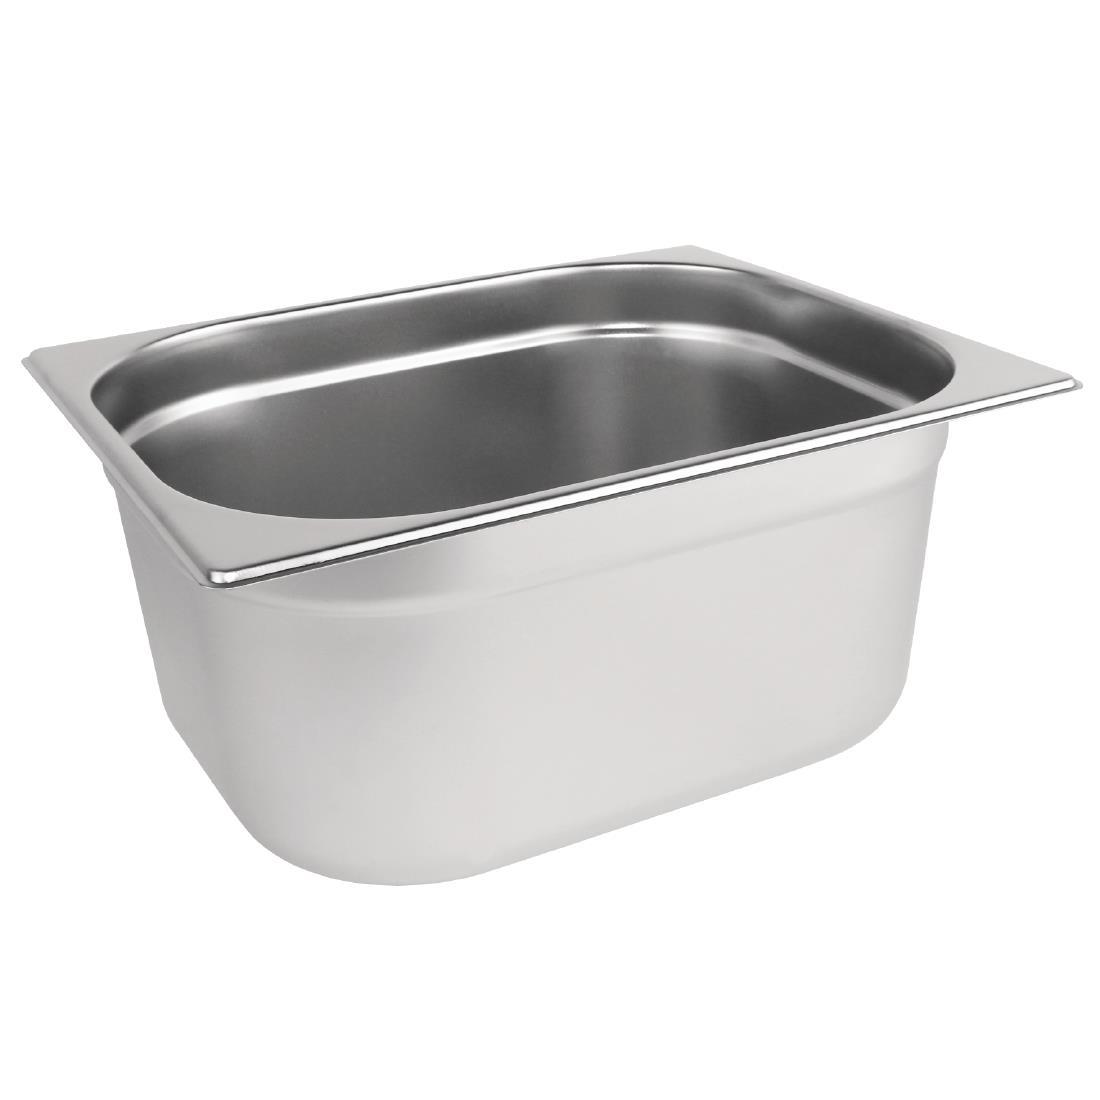 Vogue Stainless Steel 1/2 Gastronorm Pan 150mm - K930  - 1